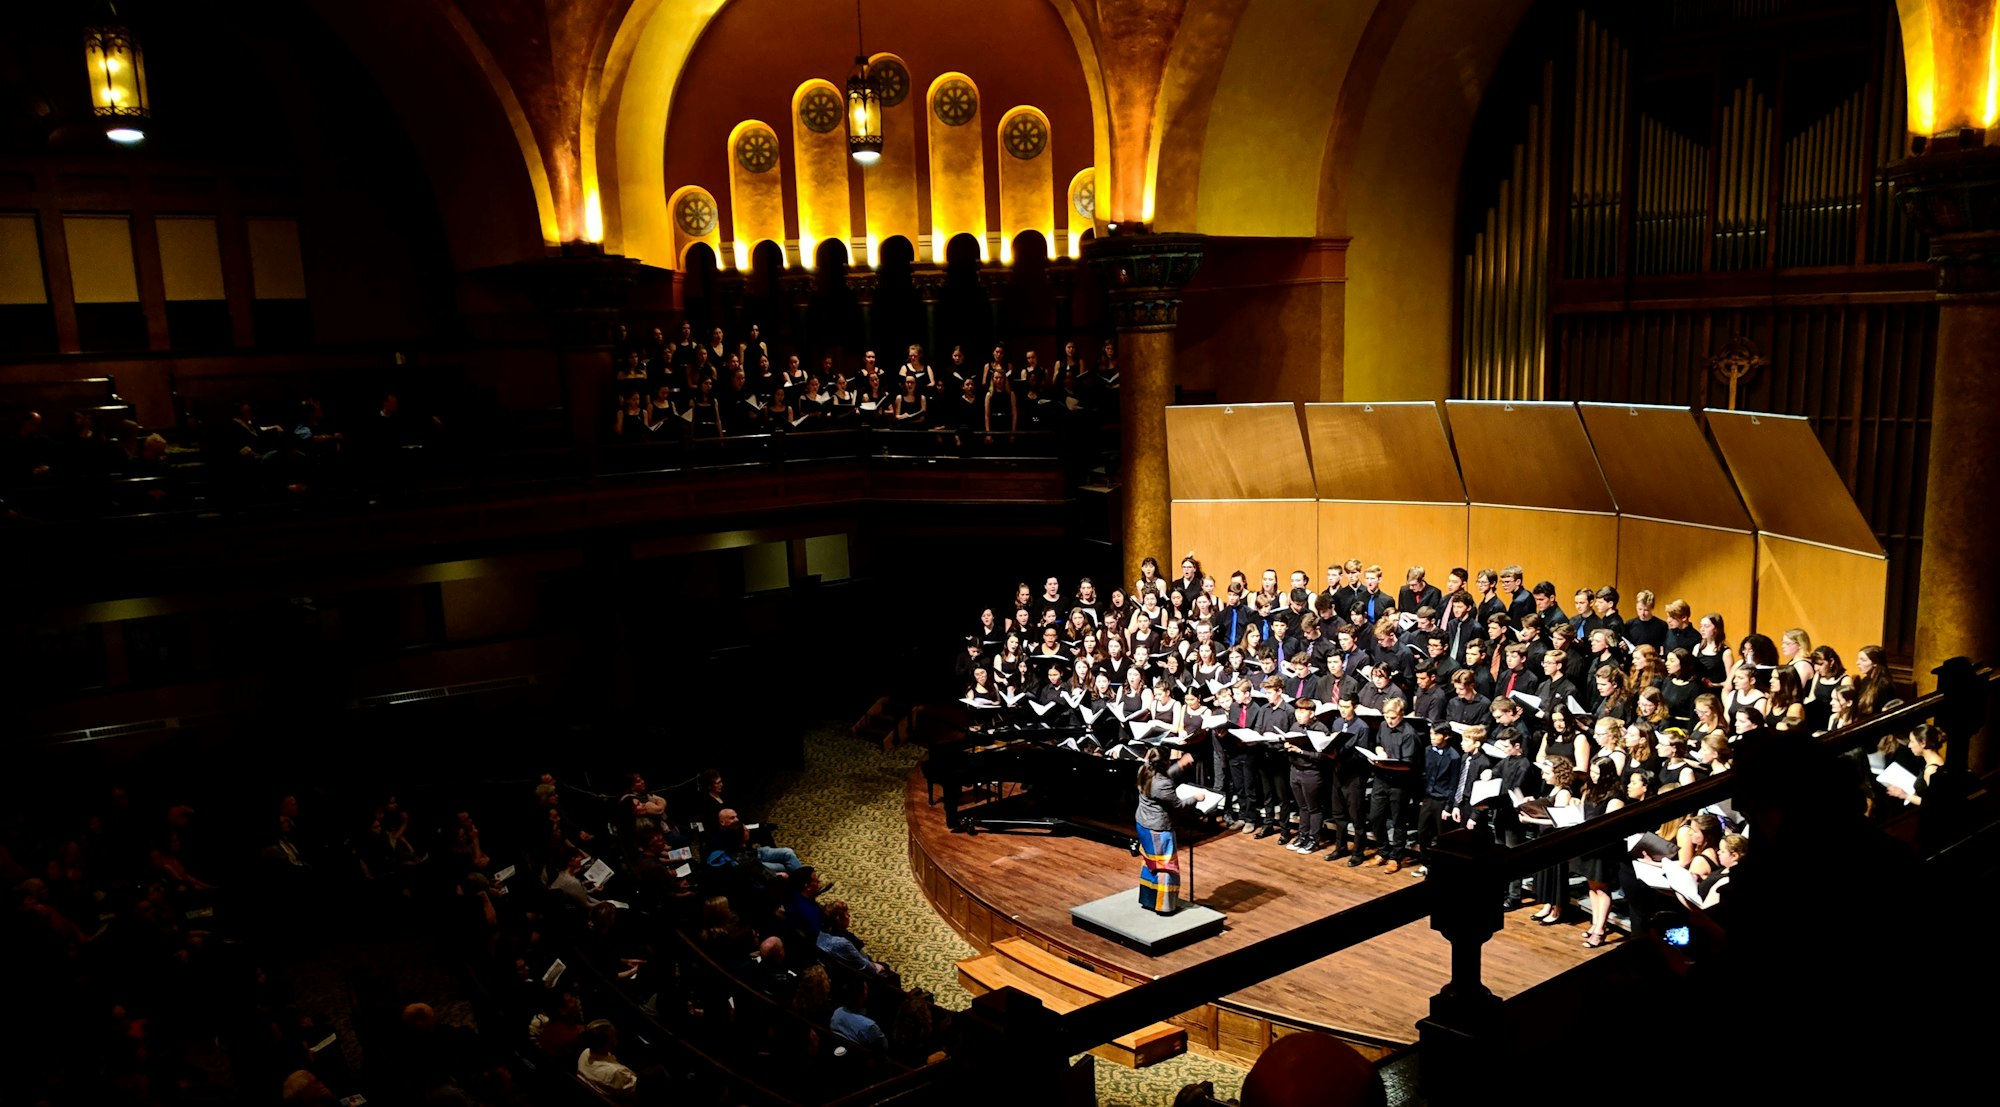 A choir performs for a large audience in a concert hall.